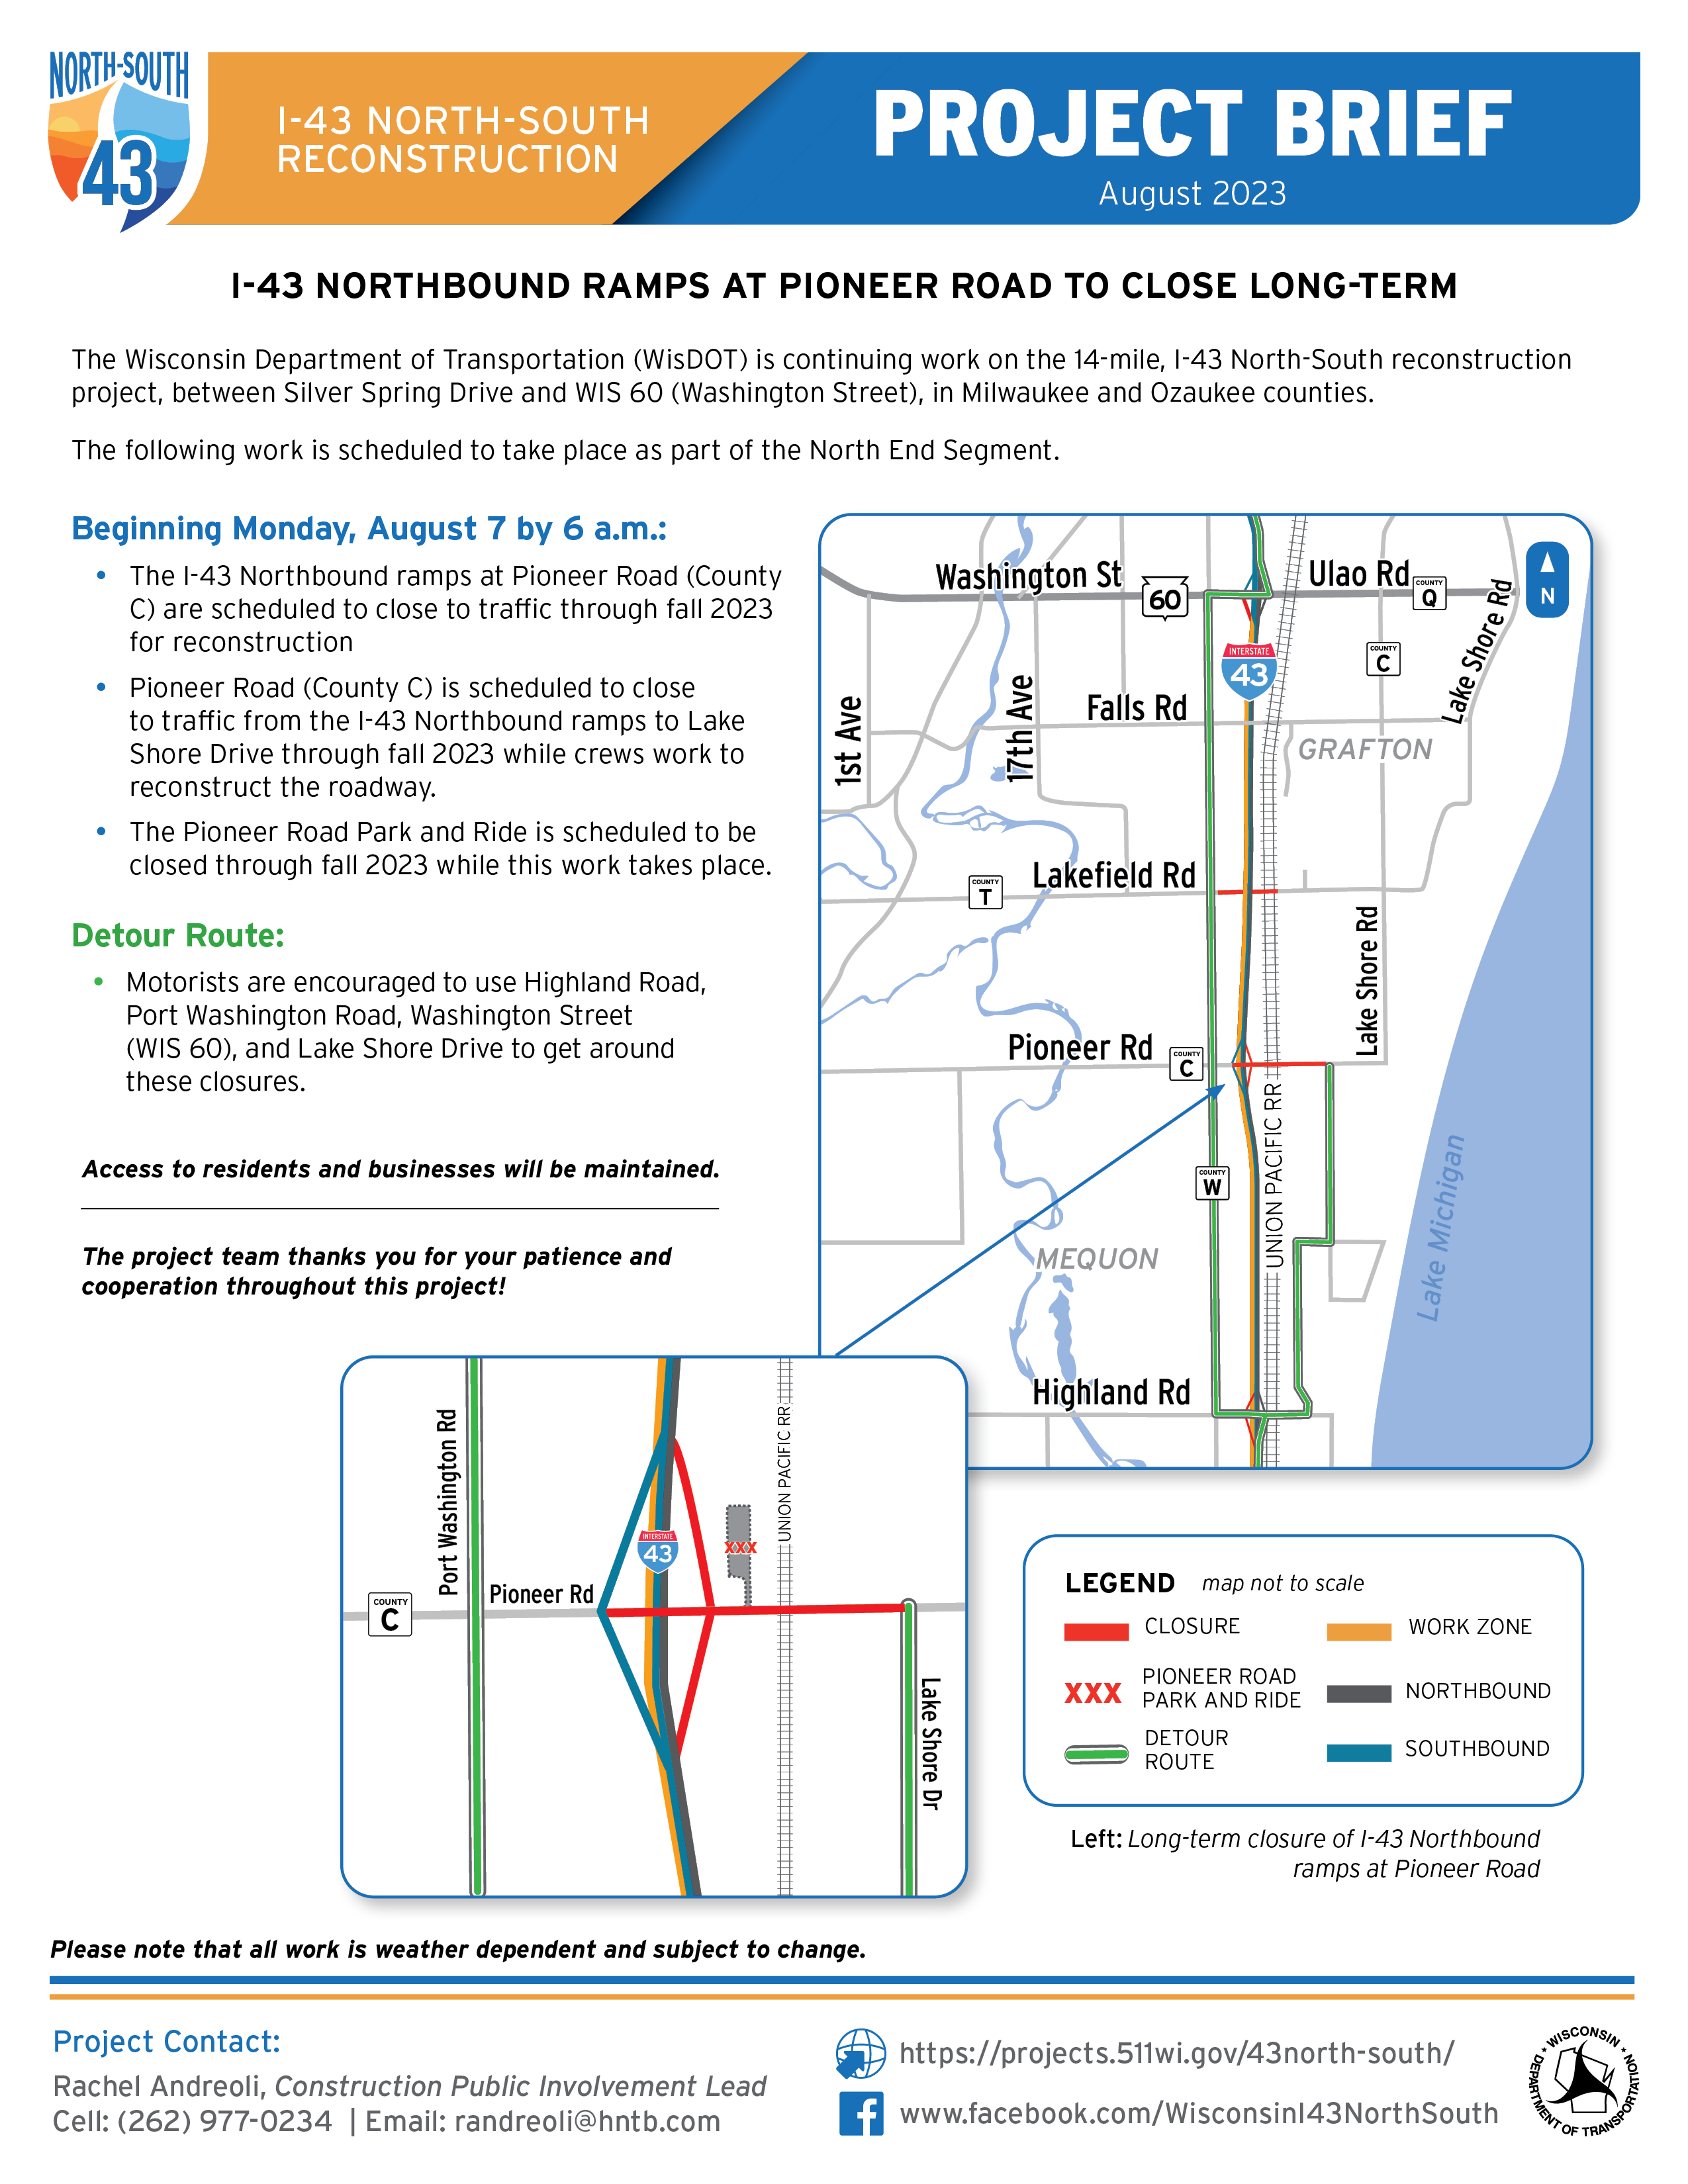 August 7, I-43 Northbound Ramps at Pioneer Road to Close Long-Term